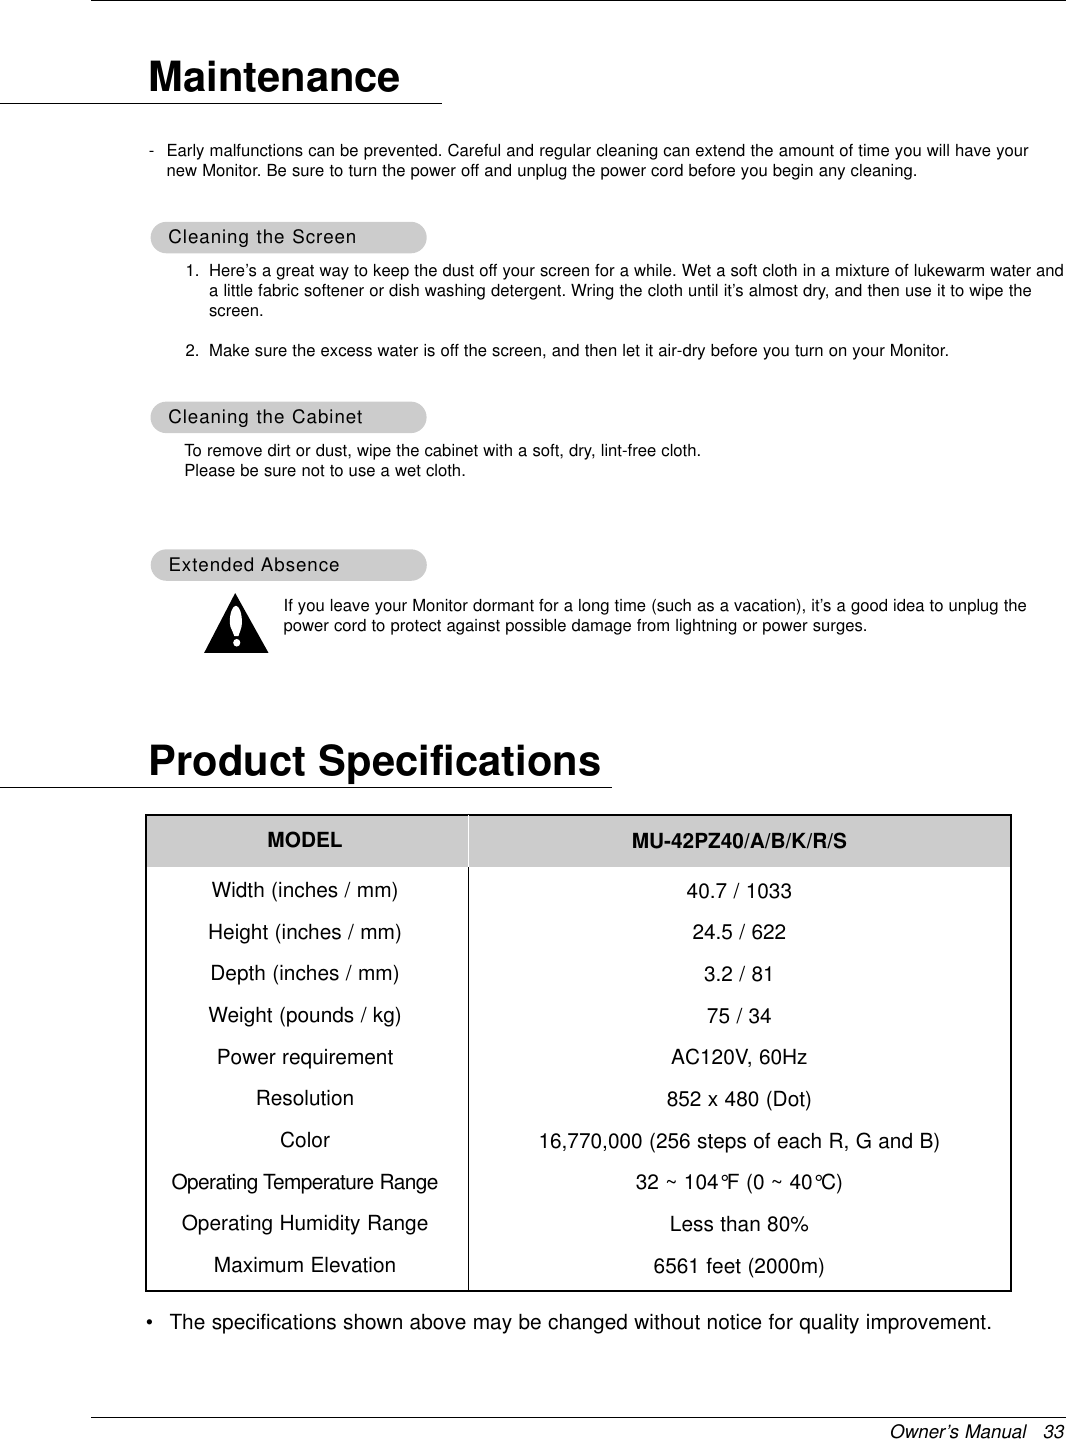 Owner’s Manual   33Product Specifications•The specifications shown above may be changed without notice for quality improvement.1. Here’s a great way to keep the dust off your screen for a while. Wet a soft cloth in a mixture of lukewarm water anda little fabric softener or dish washing detergent. Wring the cloth until it’s almost dry, and then use it to wipe thescreen.2. Make sure the excess water is off the screen, and then let it air-dry before you turn on your Monitor.To remove dirt or dust, wipe the cabinet with a soft, dry, lint-free cloth.Please be sure not to use a wet cloth.If you leave your Monitor dormant for a long time (such as a vacation), it’s a good idea to unplug thepower cord to protect against possible damage from lightning or power surges.- Early malfunctions can be prevented. Careful and regular cleaning can extend the amount of time you will have yournew Monitor. Be sure to turn the power off and unplug the power cord before you begin any cleaning.MaintenanceCleaning the ScreenCleaning the ScreenCleaning the CabinetCleaning the CabinetExtended Extended AbsenceAbsenceMODELWidth (inches / mm)Height (inches / mm)Depth (inches / mm)Weight (pounds / kg)Power requirementResolutionColorOperating Temperature RangeOperating Humidity RangeMaximum ElevationMU-42PZ40/A/B/K/R/S 40.7 / 103324.5 / 6223.2 / 8175 / 34AC120V, 60Hz852 x 480 (Dot)16,770,000 (256 steps of each R, G and B)32 ~ 104°F (0 ~ 40°C)Less than 80%6561 feet (2000m)